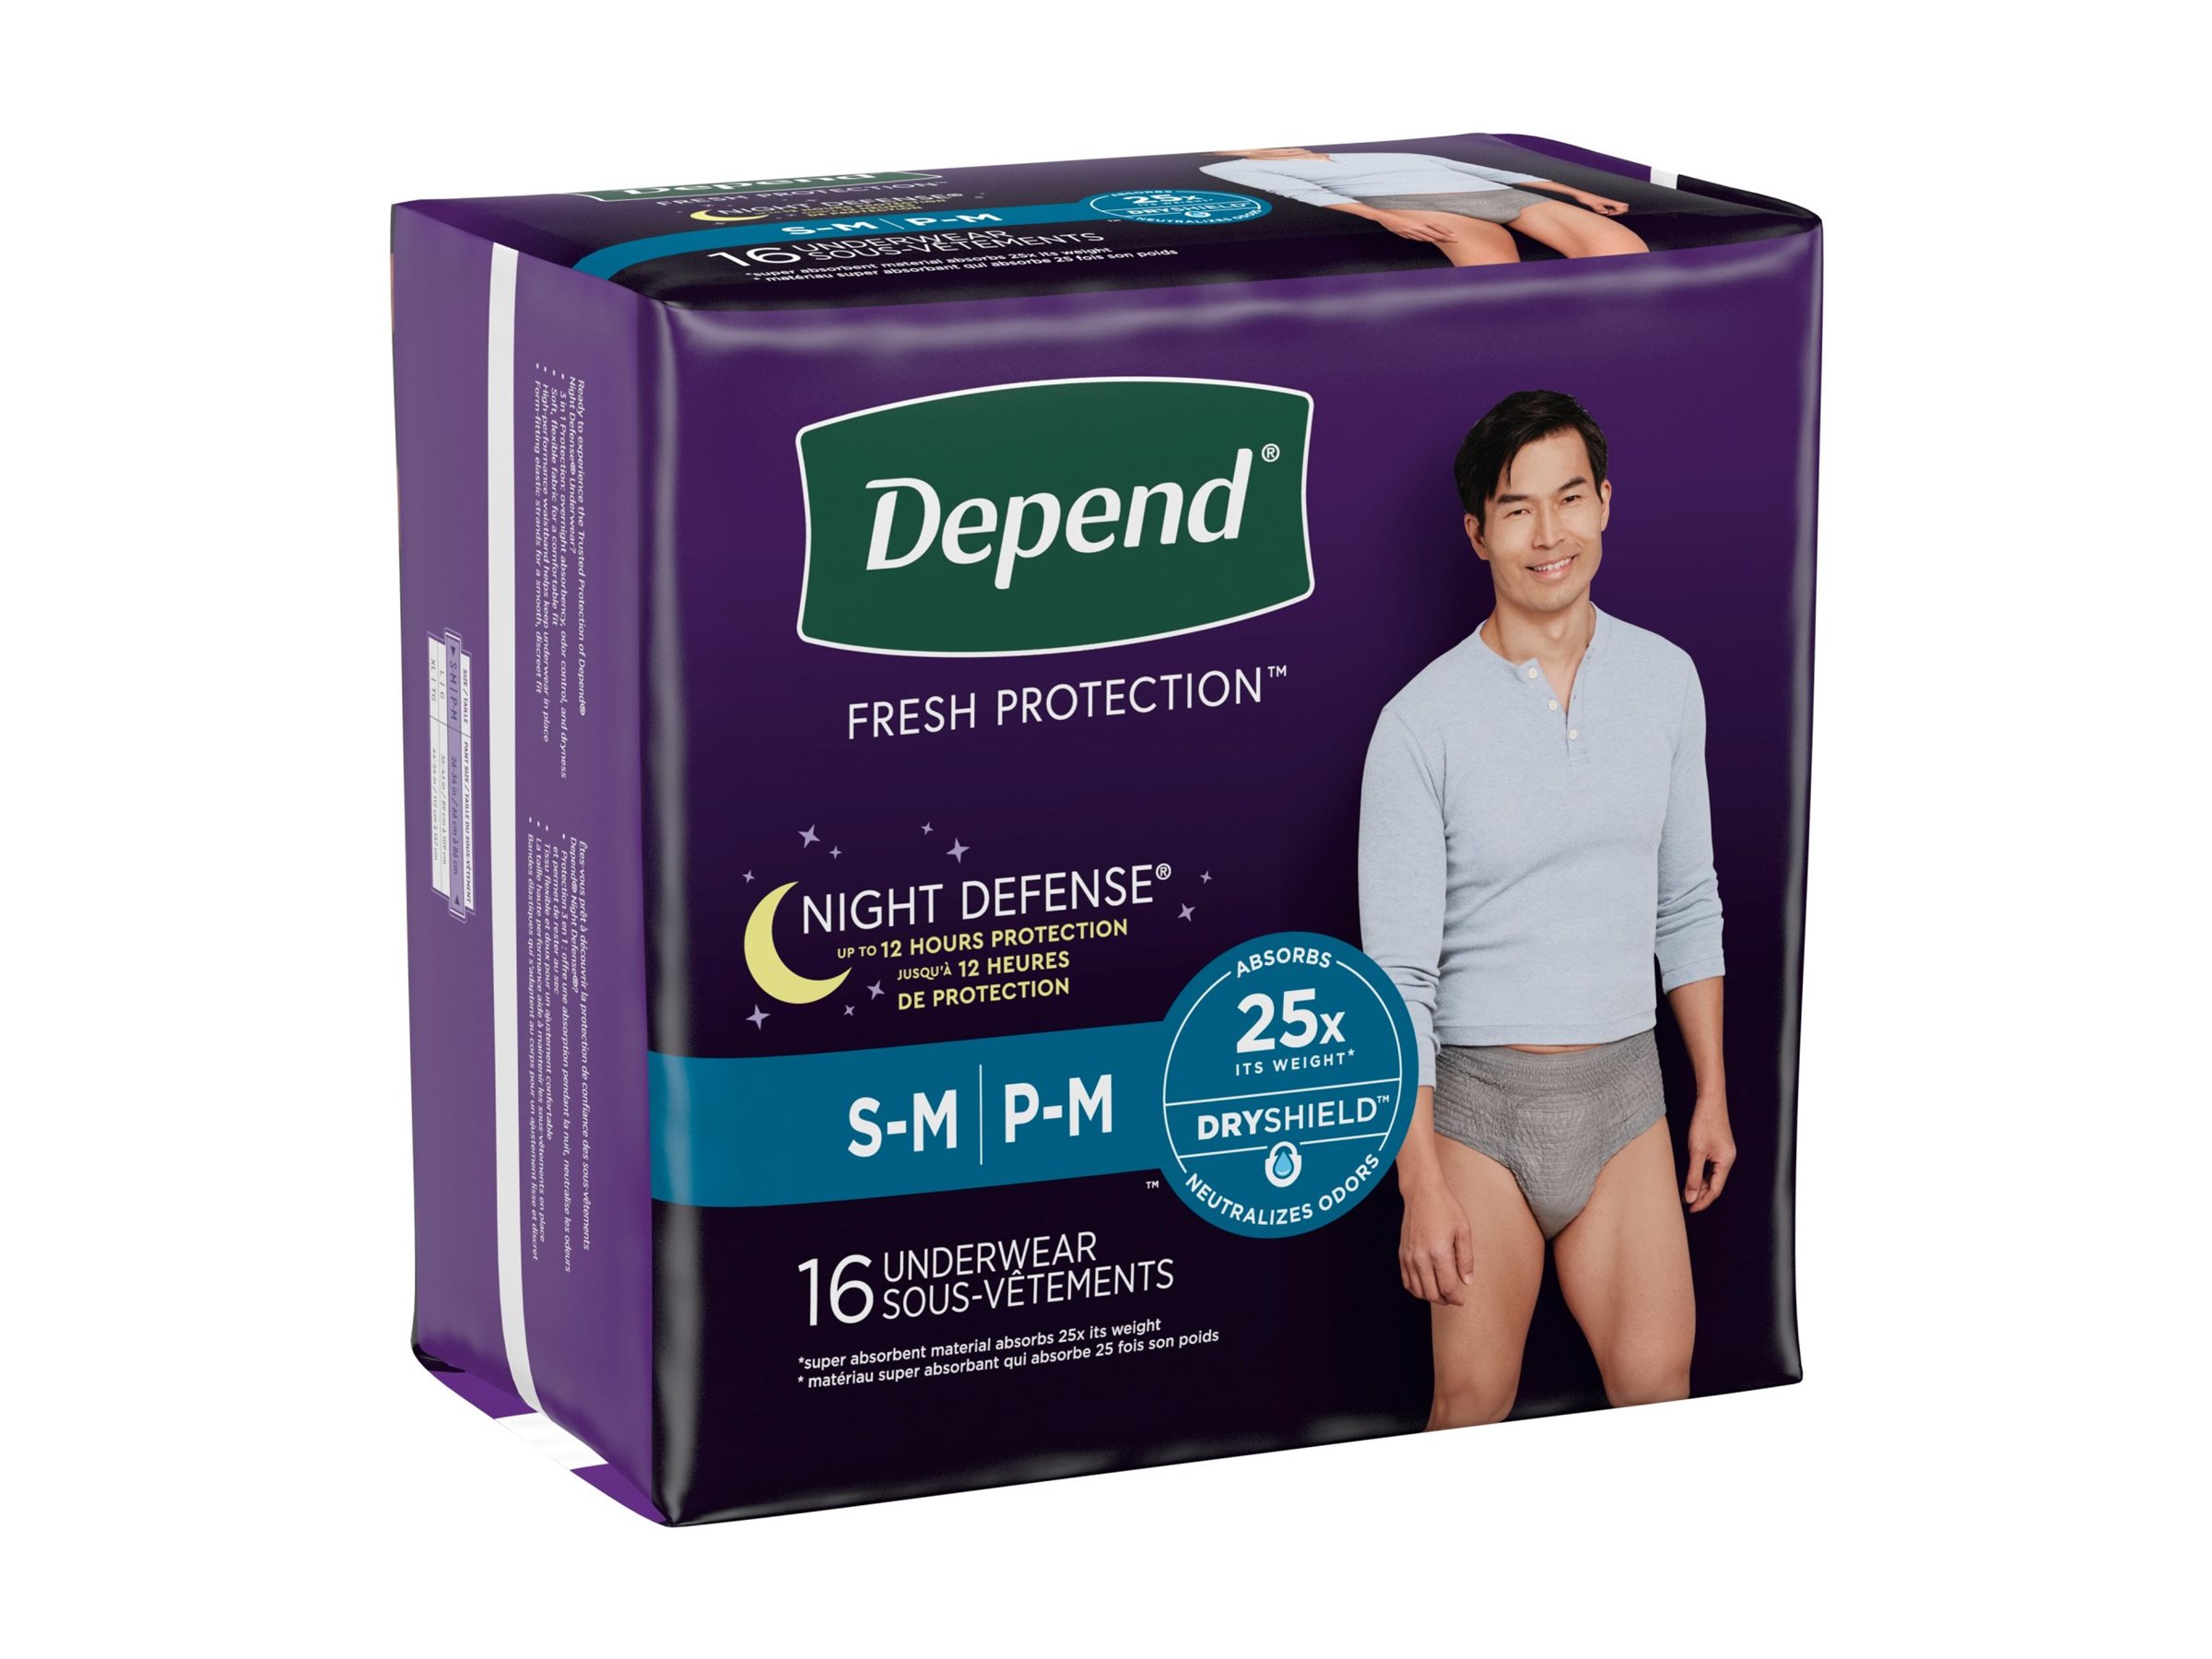 Depend Night Defense Adult Incontinence Underwear for Men - Overnight - S/M - 16 Count